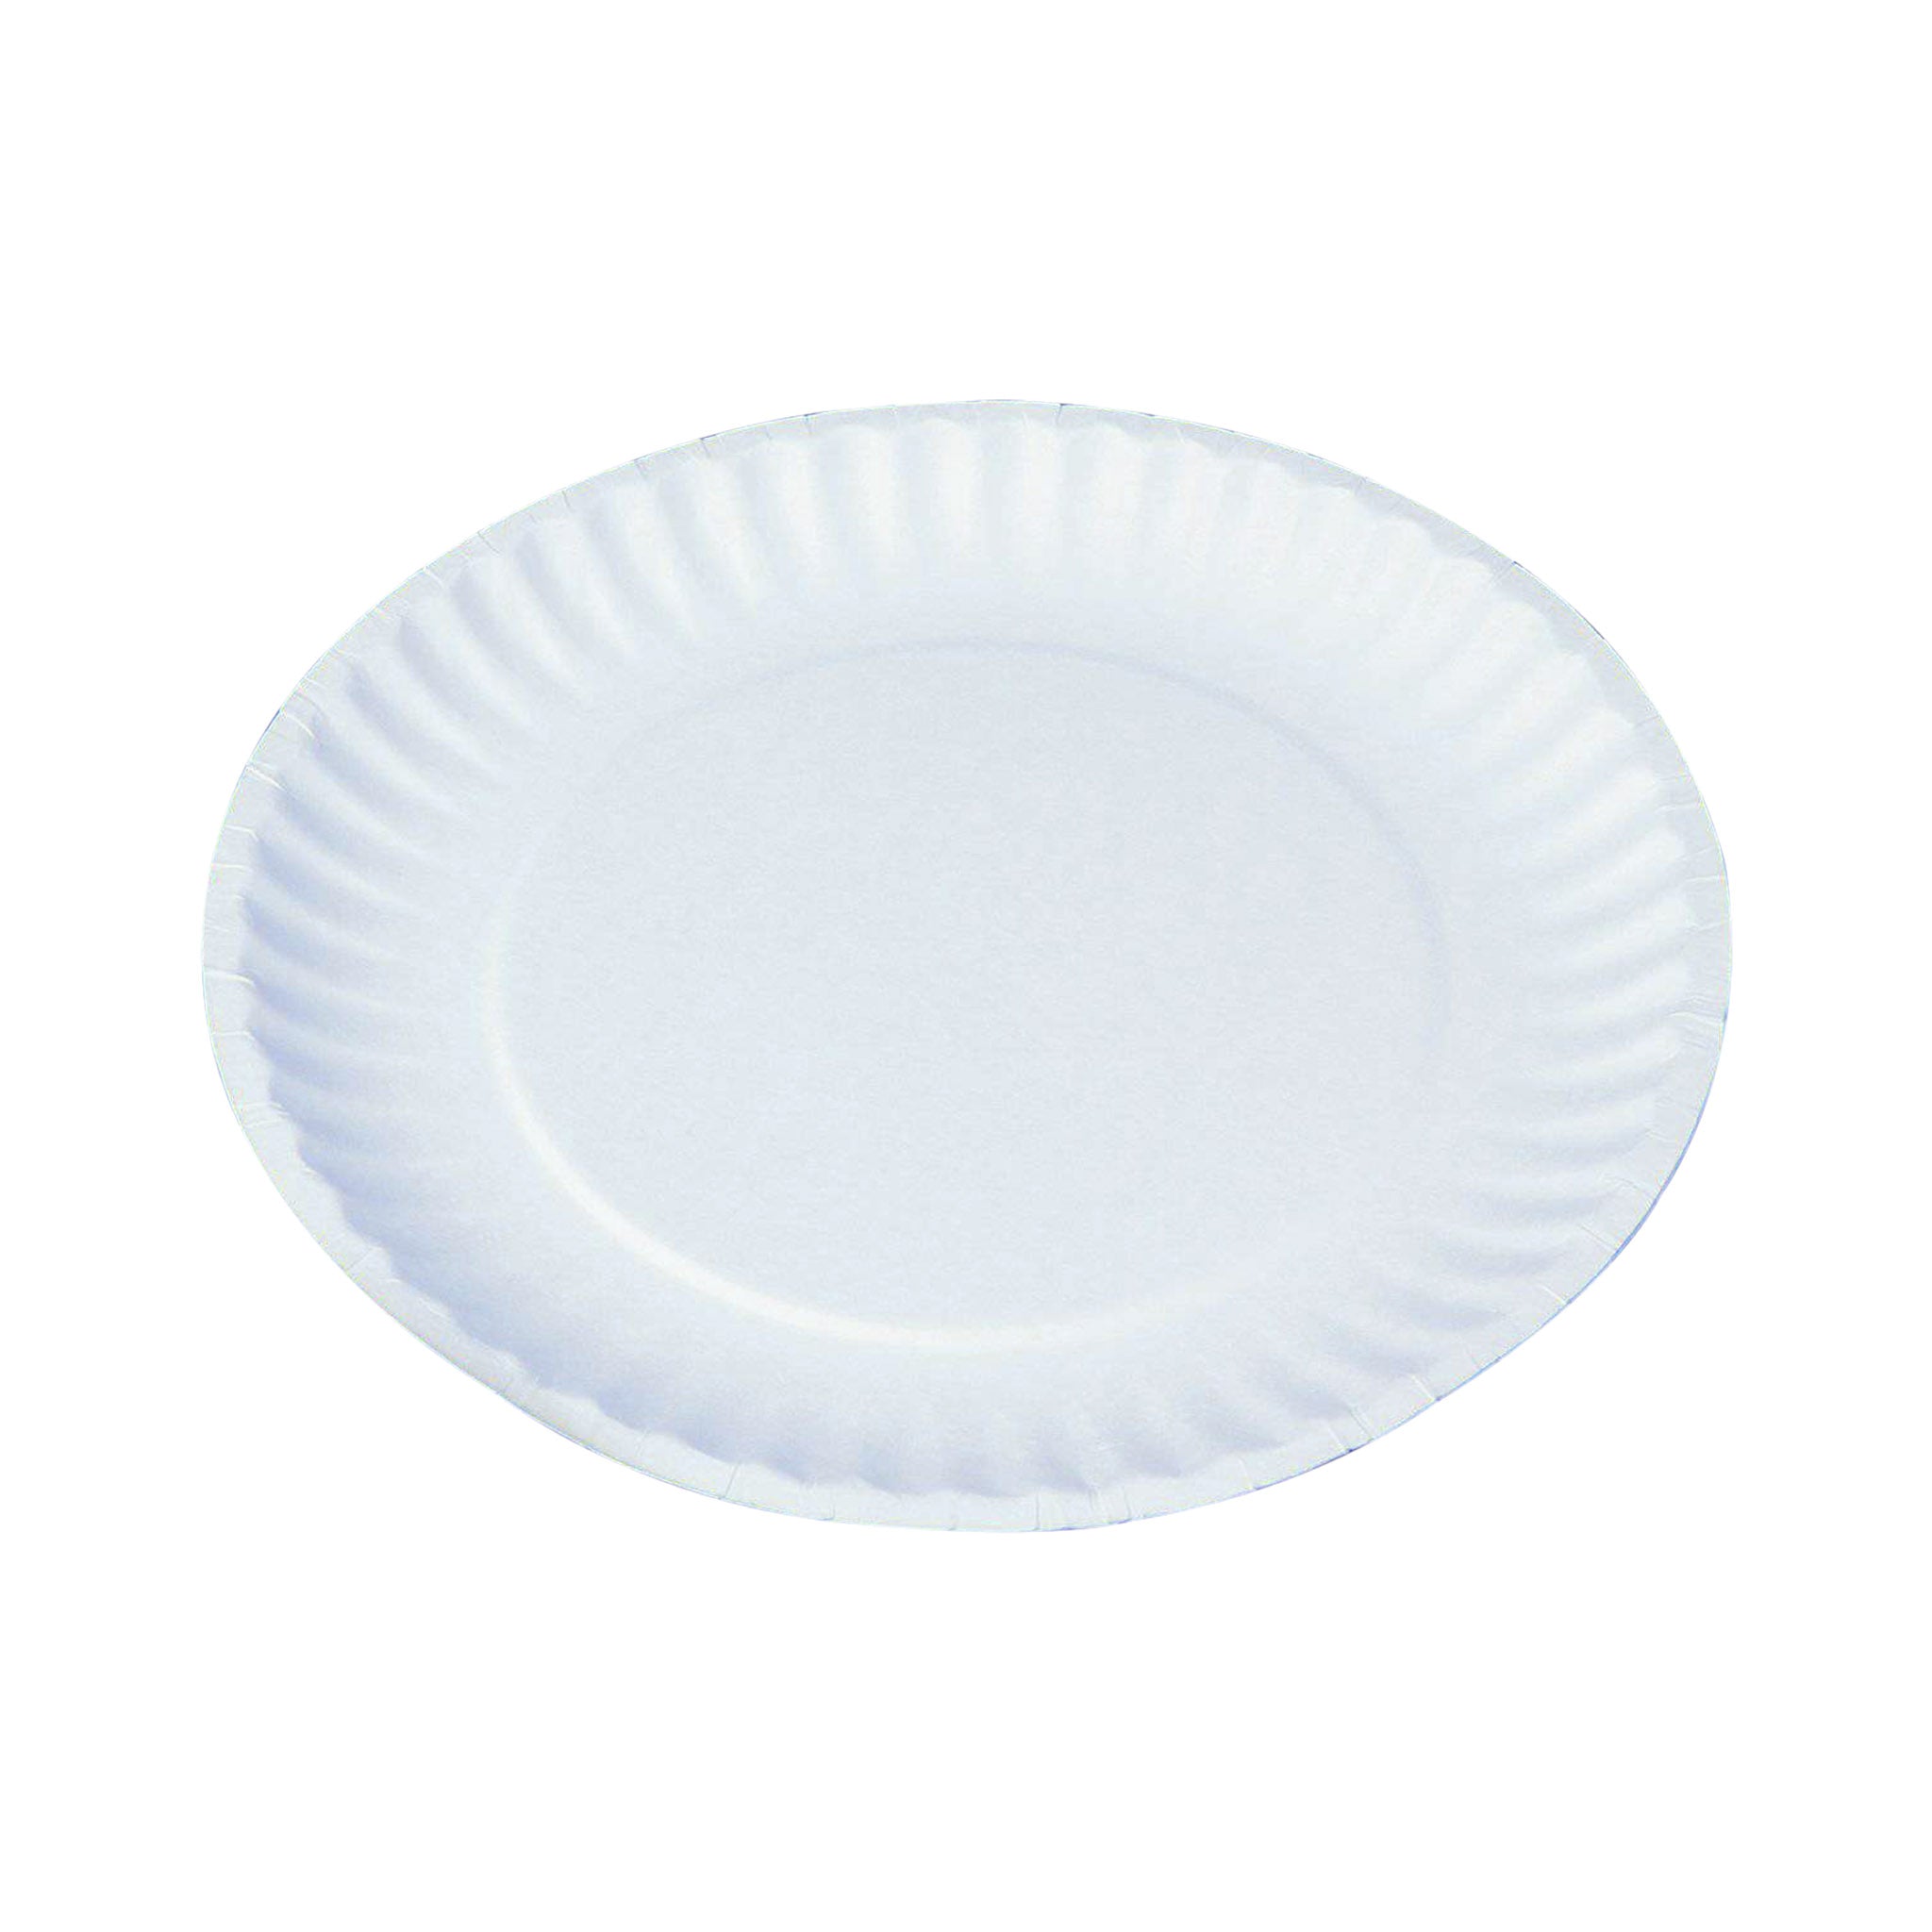 Paper Plate Light Duty 1200 Pieces - Hotpack Global